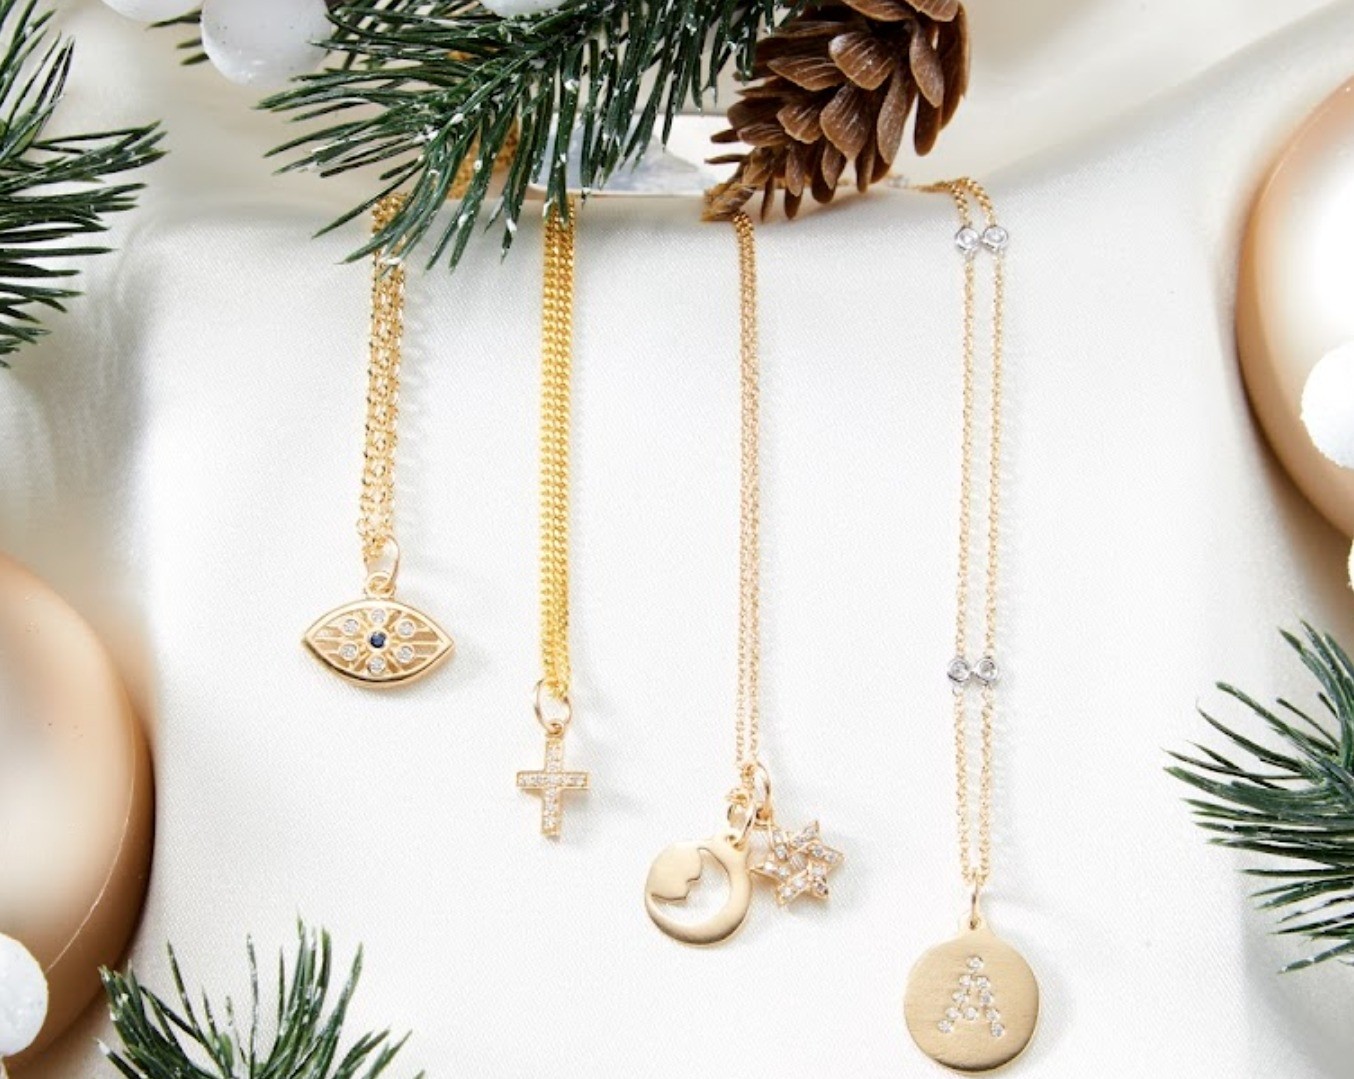 Helen Ficalora Jewelry is Set to Brighten the Holiday Season